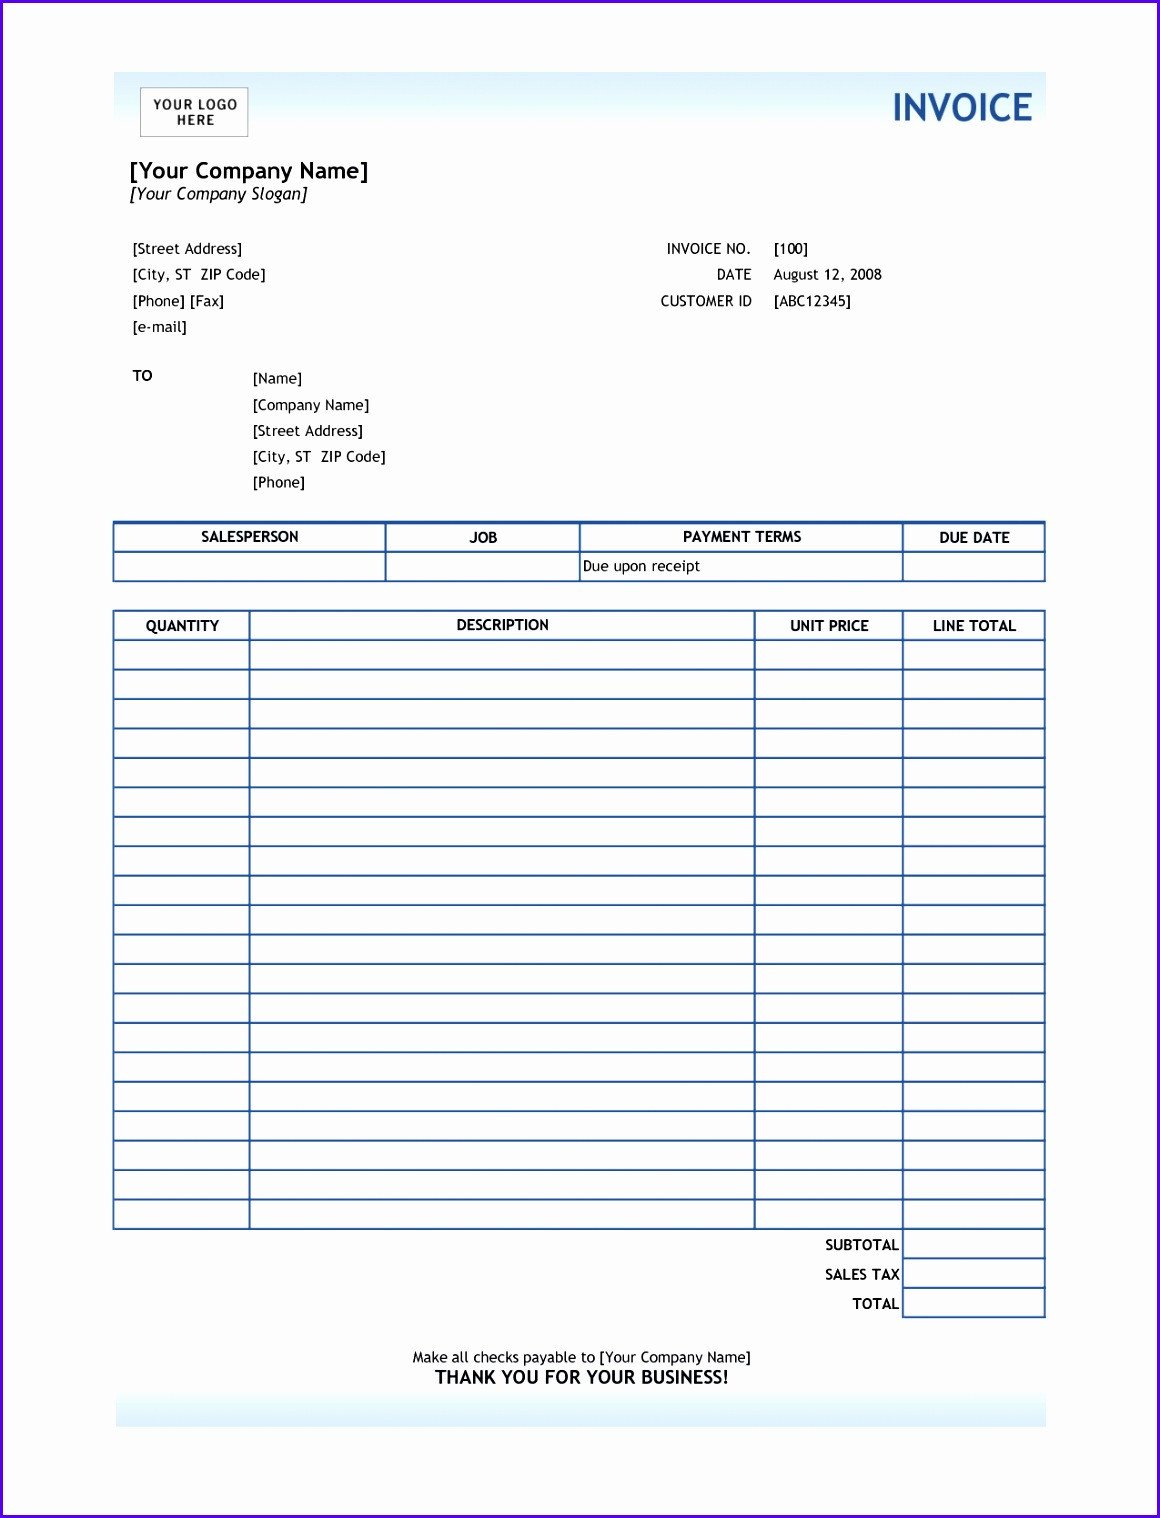 Excel Invoice Template Download 10 Microsoft Excel Invoice Template Free Download